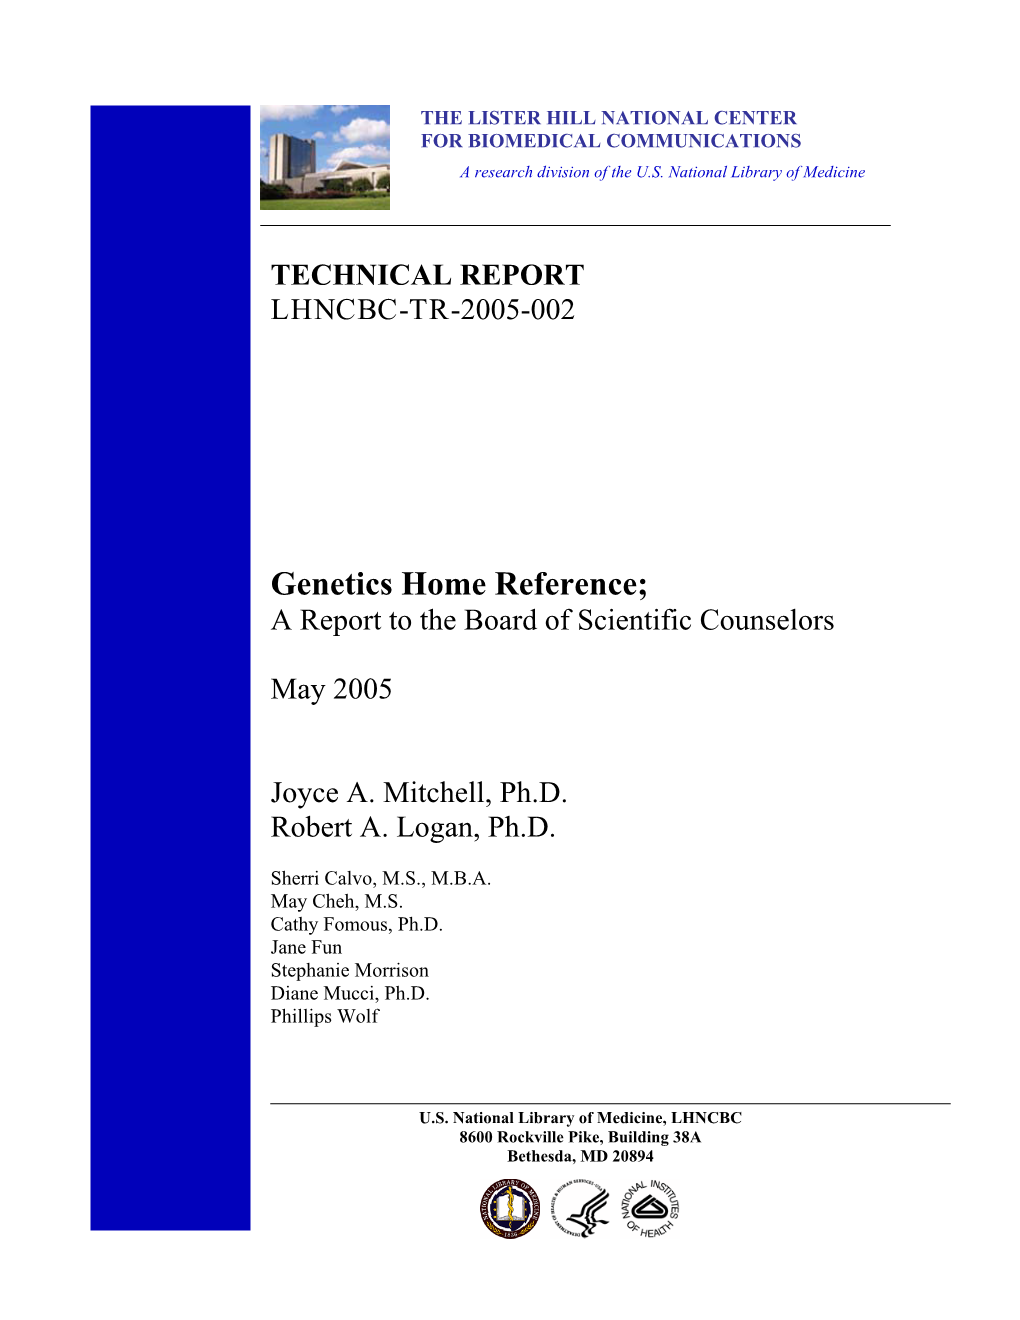 Genetics Home Reference; a Report to the Board of Scientific Counselors